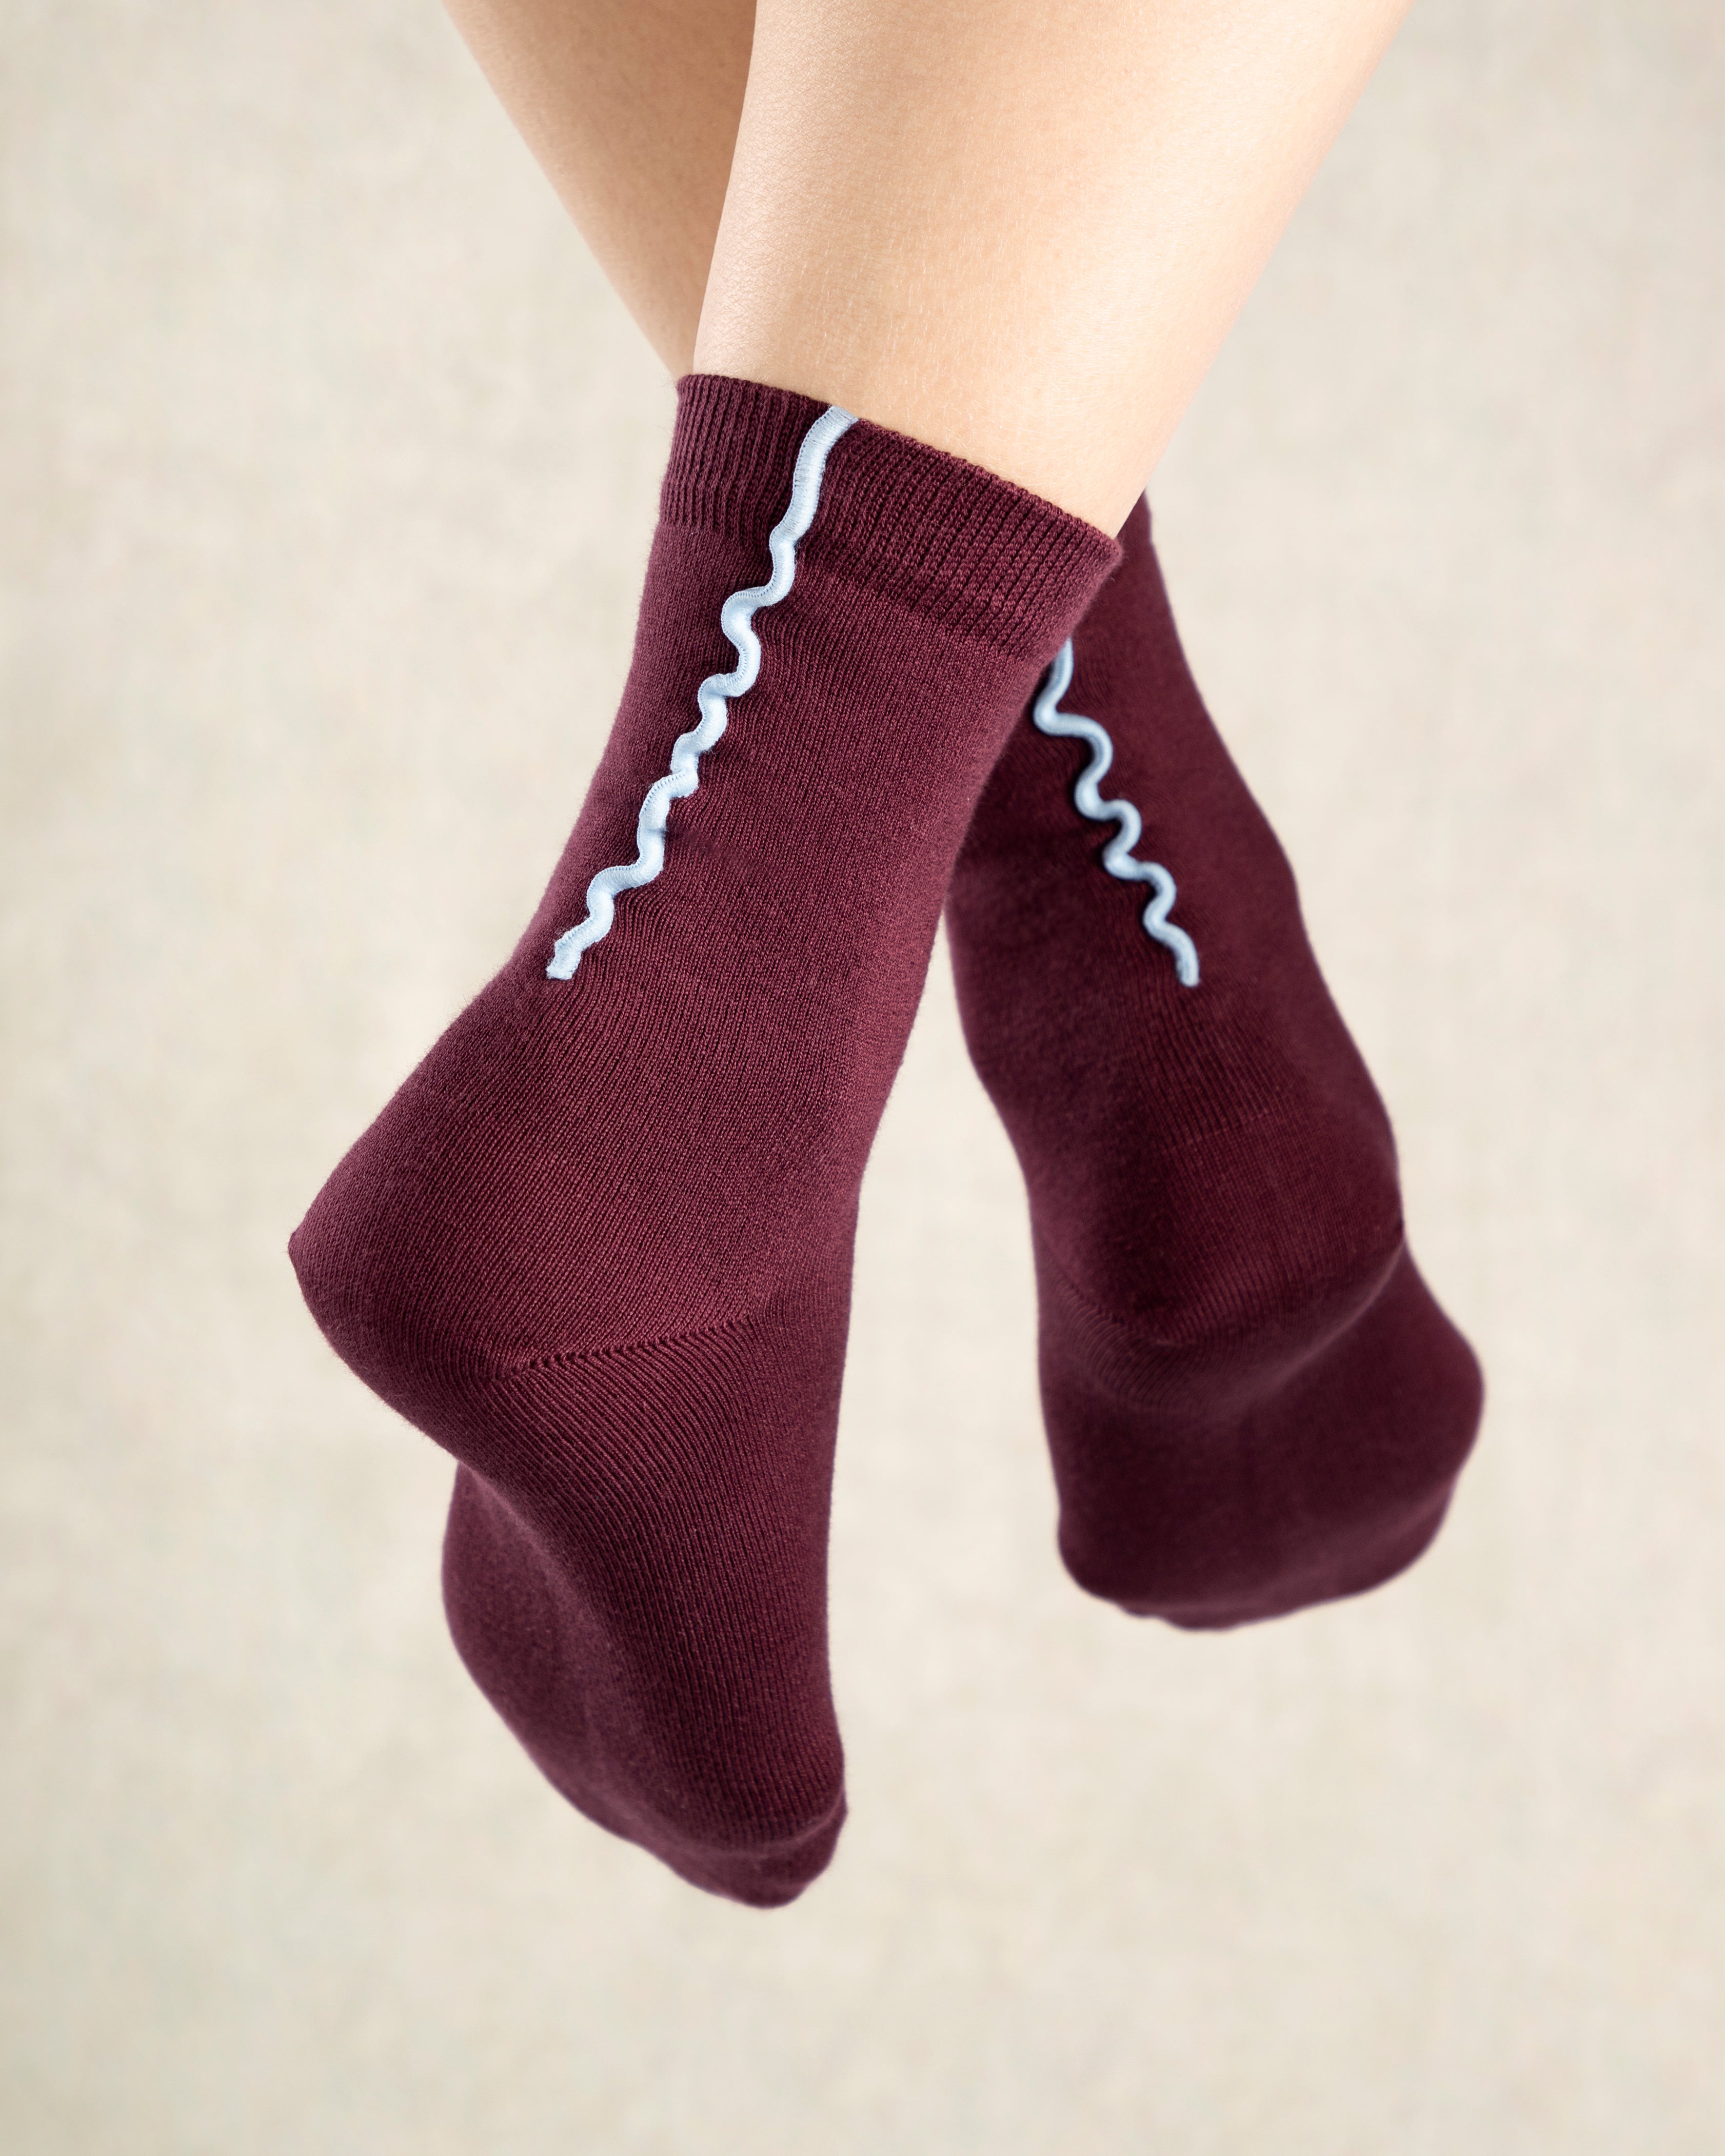 Ruby Wine Crew Sock Womens High Sock Two Toned Color